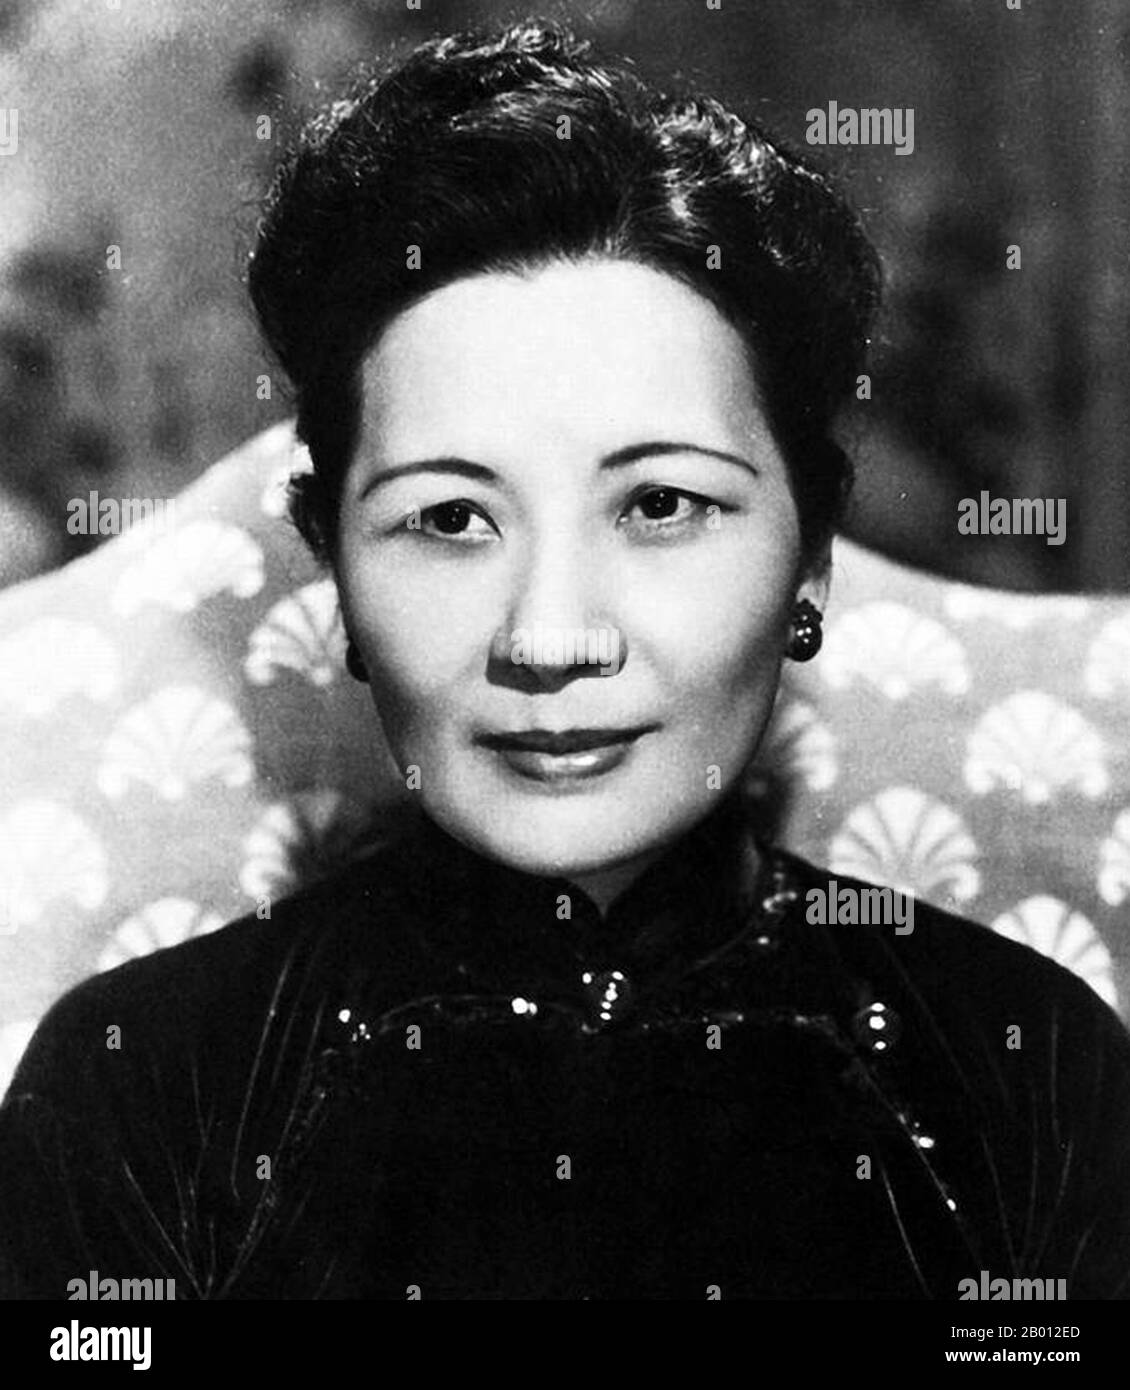 Taiwan/China: Soong May-ling or Mei-ling, also known as Madame Chiang Kai-shek (Song Meiling, 1898-2003), First Lady of the Republic of China (ROC) and wife of President Chiang Kai-shek.  She was a politician and painter. The youngest and the last surviving of the three Soong sisters, she played a prominent role in the politics of the Republic of China and was the sister of Song Qingling, wife of President Sun Yat-sen, the founder of the Chinese Republic (1912). Stock Photo